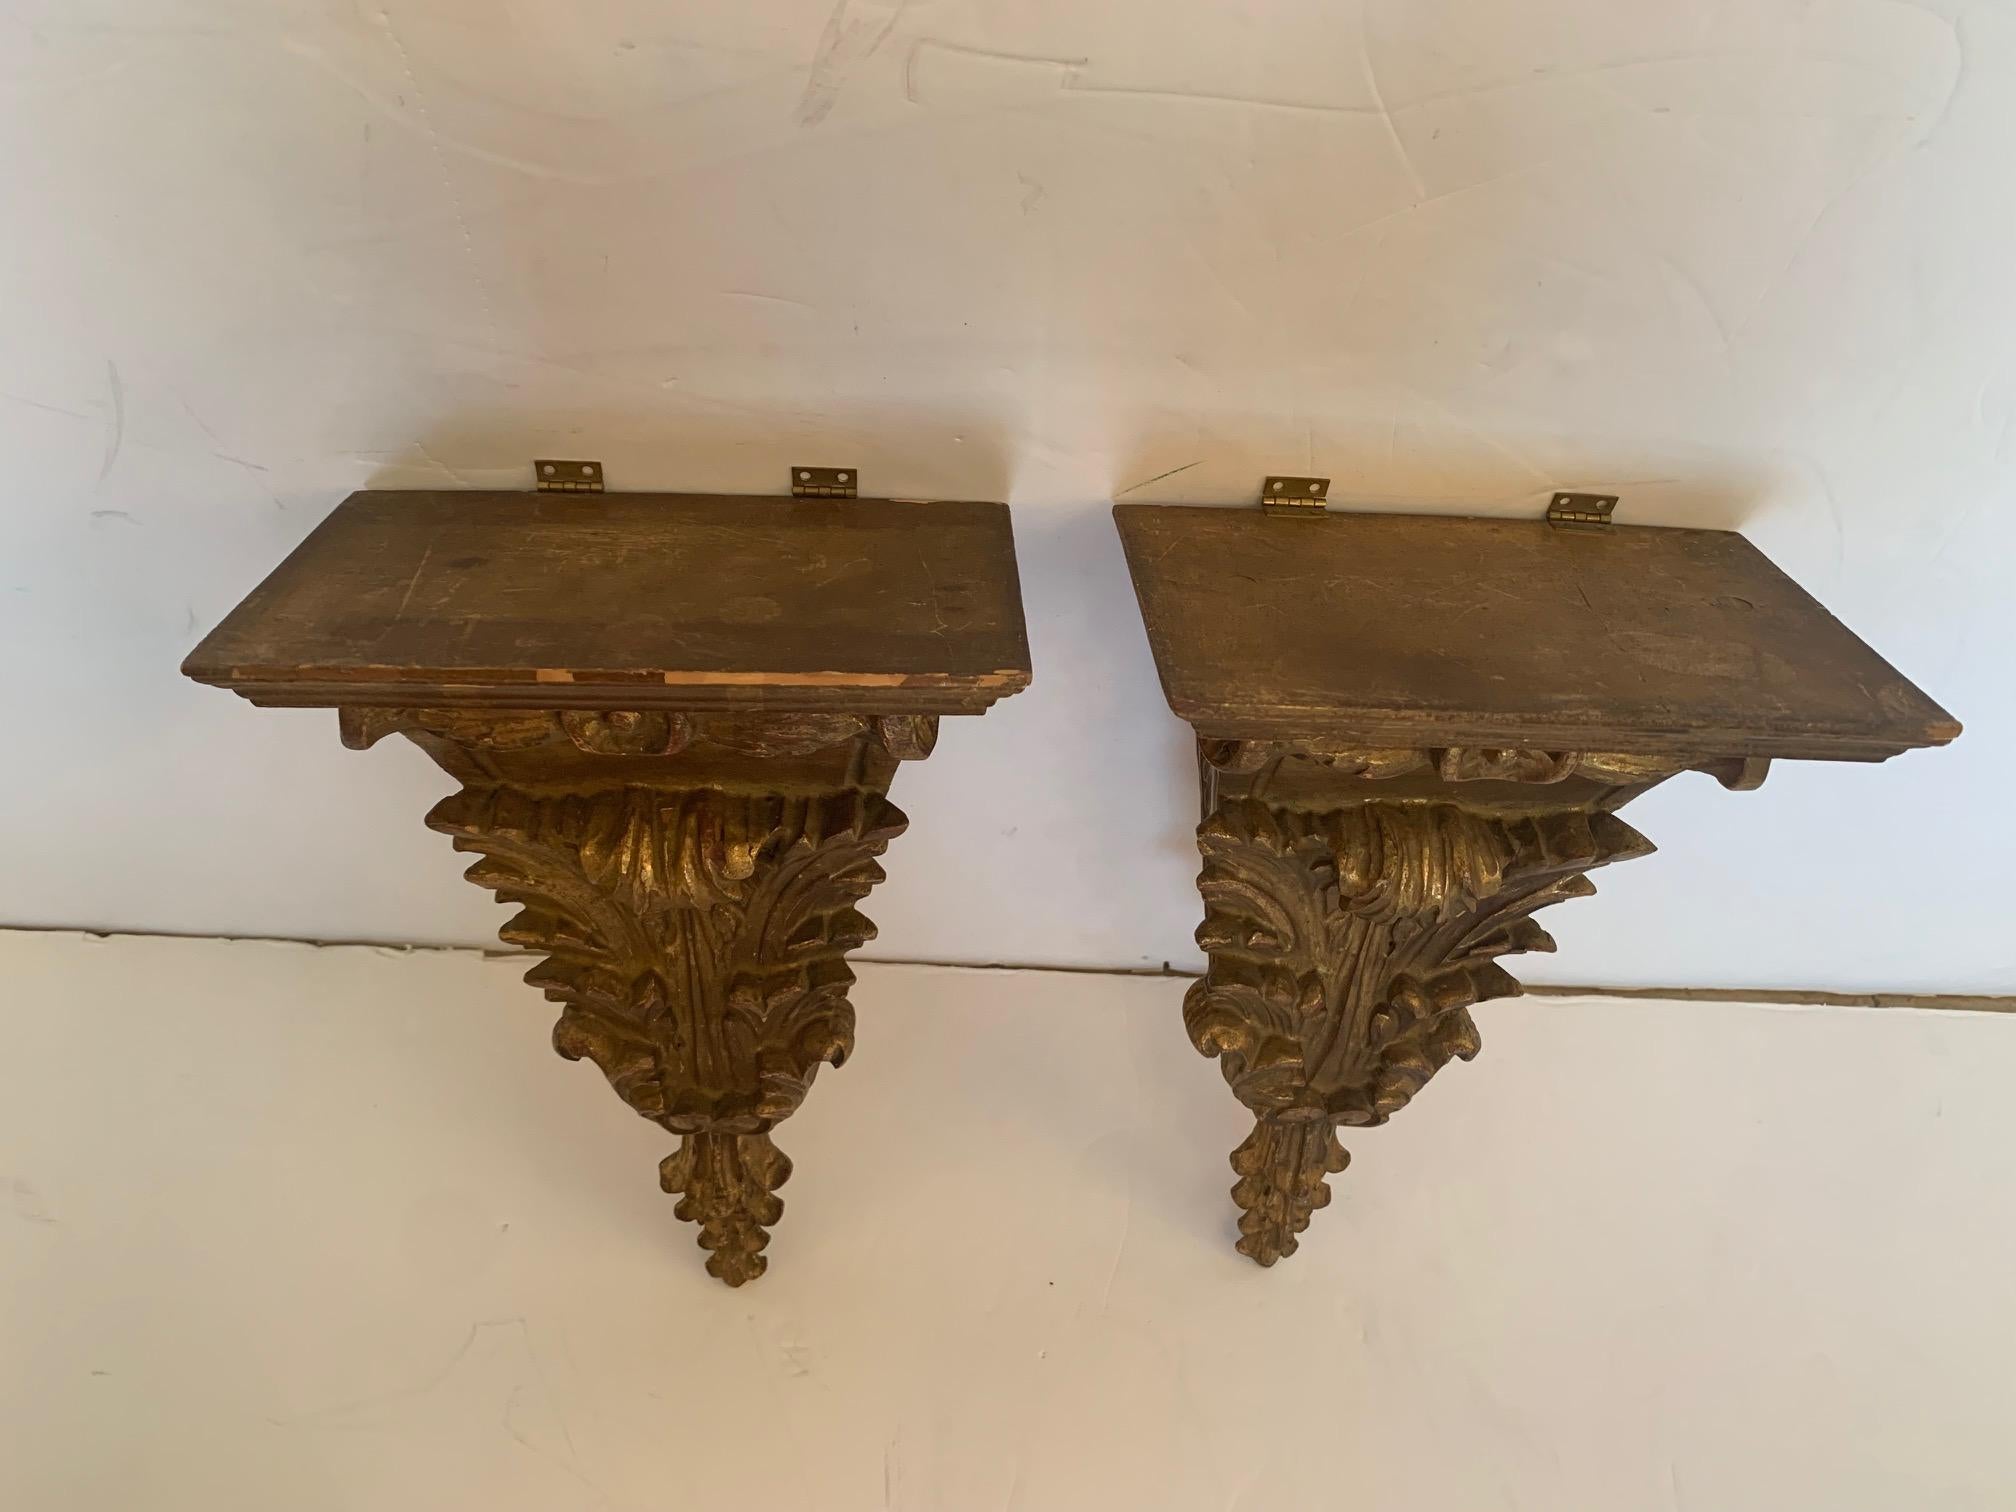 Superbly elegant pair of French antique carved and gilded wood wall brackets adorned with acanthus leaves.